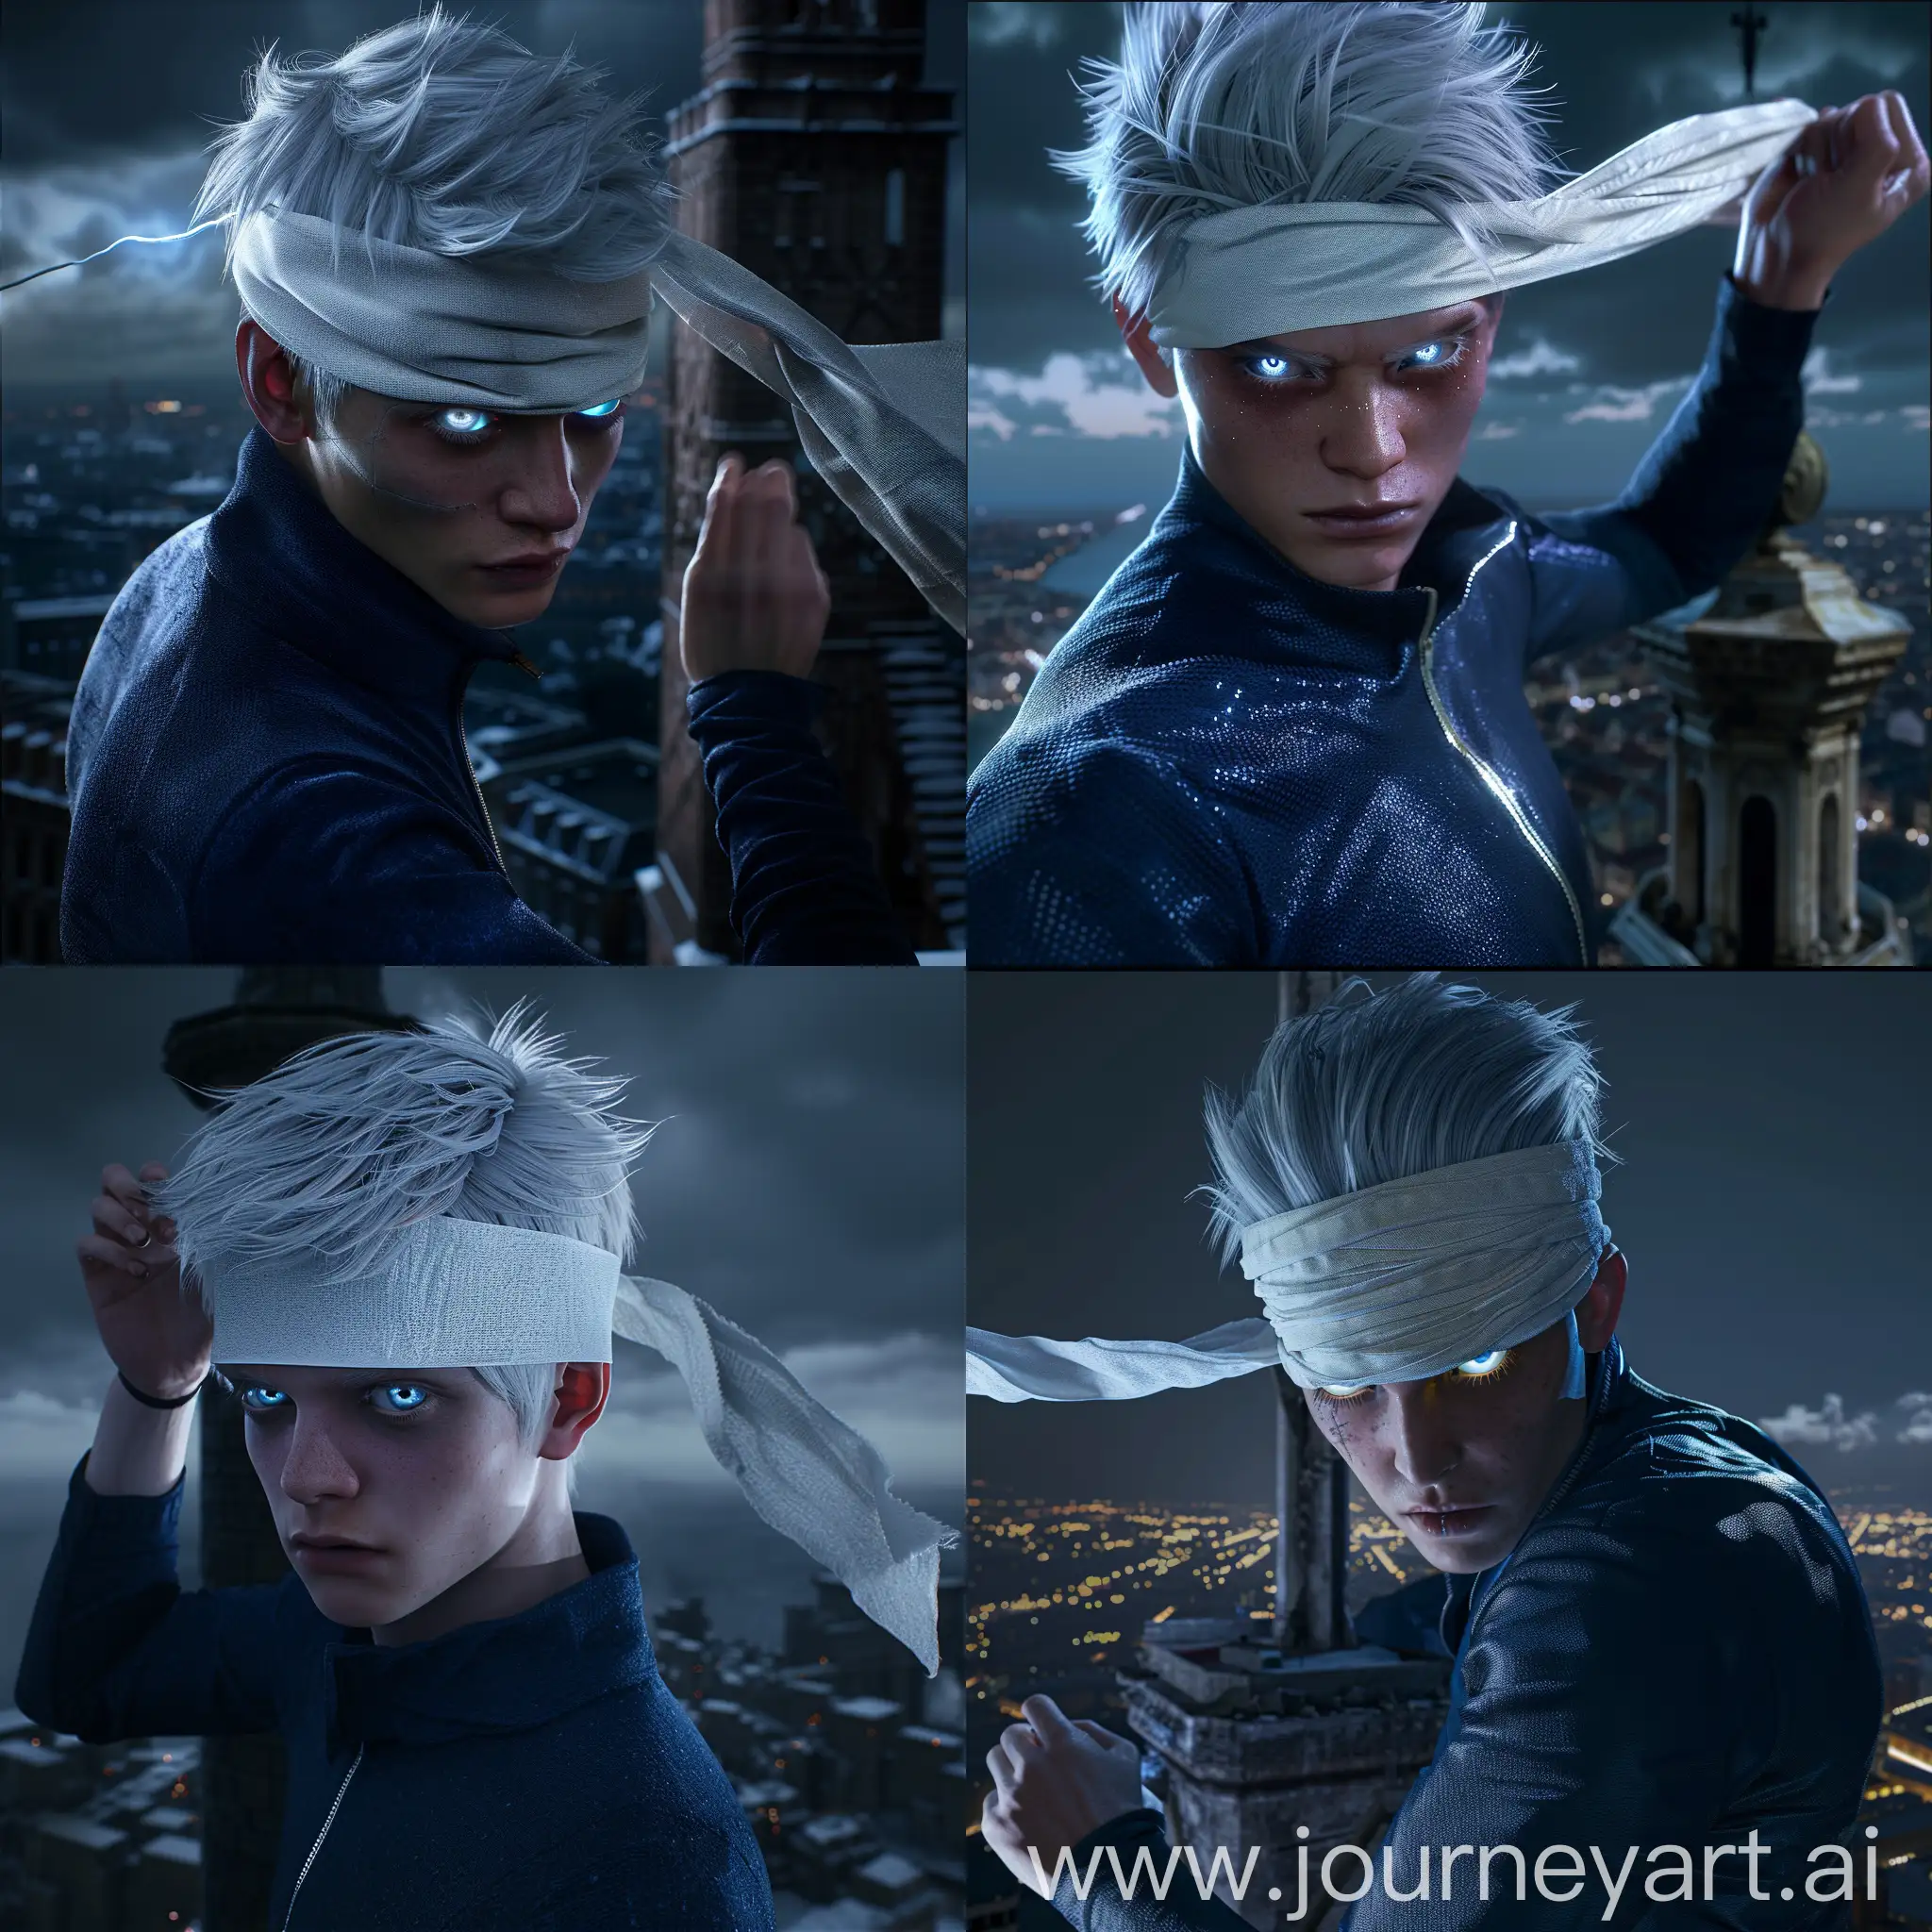 generate a ultra realistic and highly detailed (Gojo satoru) from ( jjk) in a mid range shot in an epic cinematic scene,handsome face, blue eyes that are very beautiful,his hair are white (silver) and pointy that are dressed up,he is wearing a white cloth stripe as a blindfold and is pulling it with his hand revealing one of his eyes in a dramatic mood,his eyes is glowing,he is wearing a dark blue zip-up jacket whose collar is very wide,he is standing on top of a tower in an epic scene in a dark night in a dramatic mood,in a side pose looking at viewer ,and the camera is focusing his whole body,his body is tall and well built HDR UHD, 60 FPS, 8K, HIGH CRISPY detail, natural lighting, high key lighting 